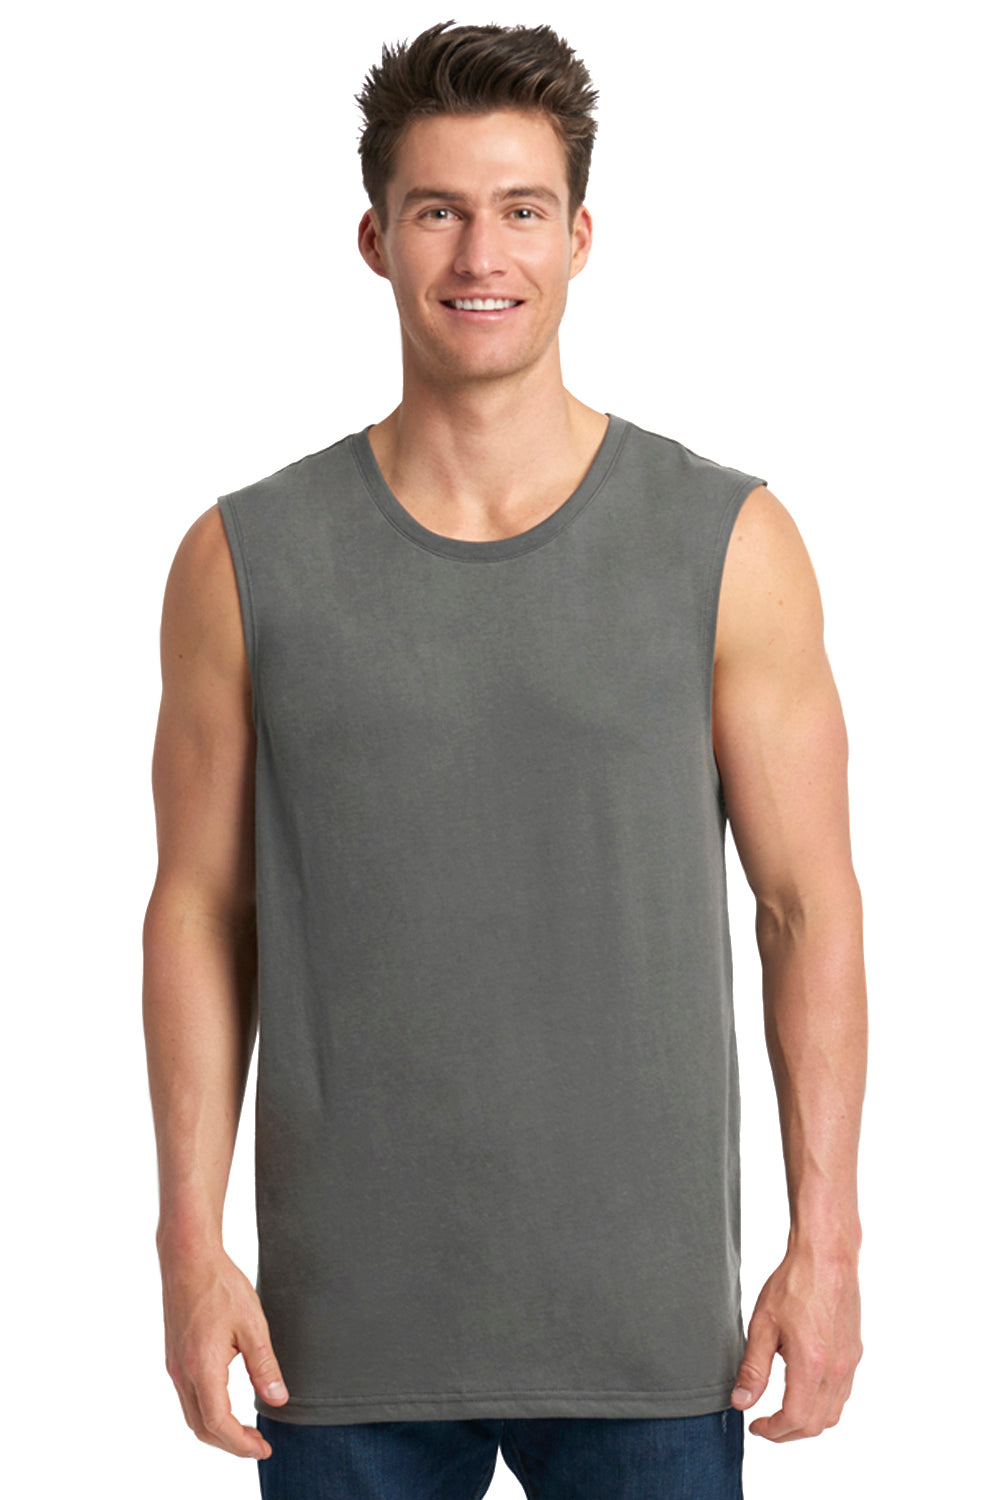 Next Level 6333 Muscle Tank Top Heavy Metal Grey Front